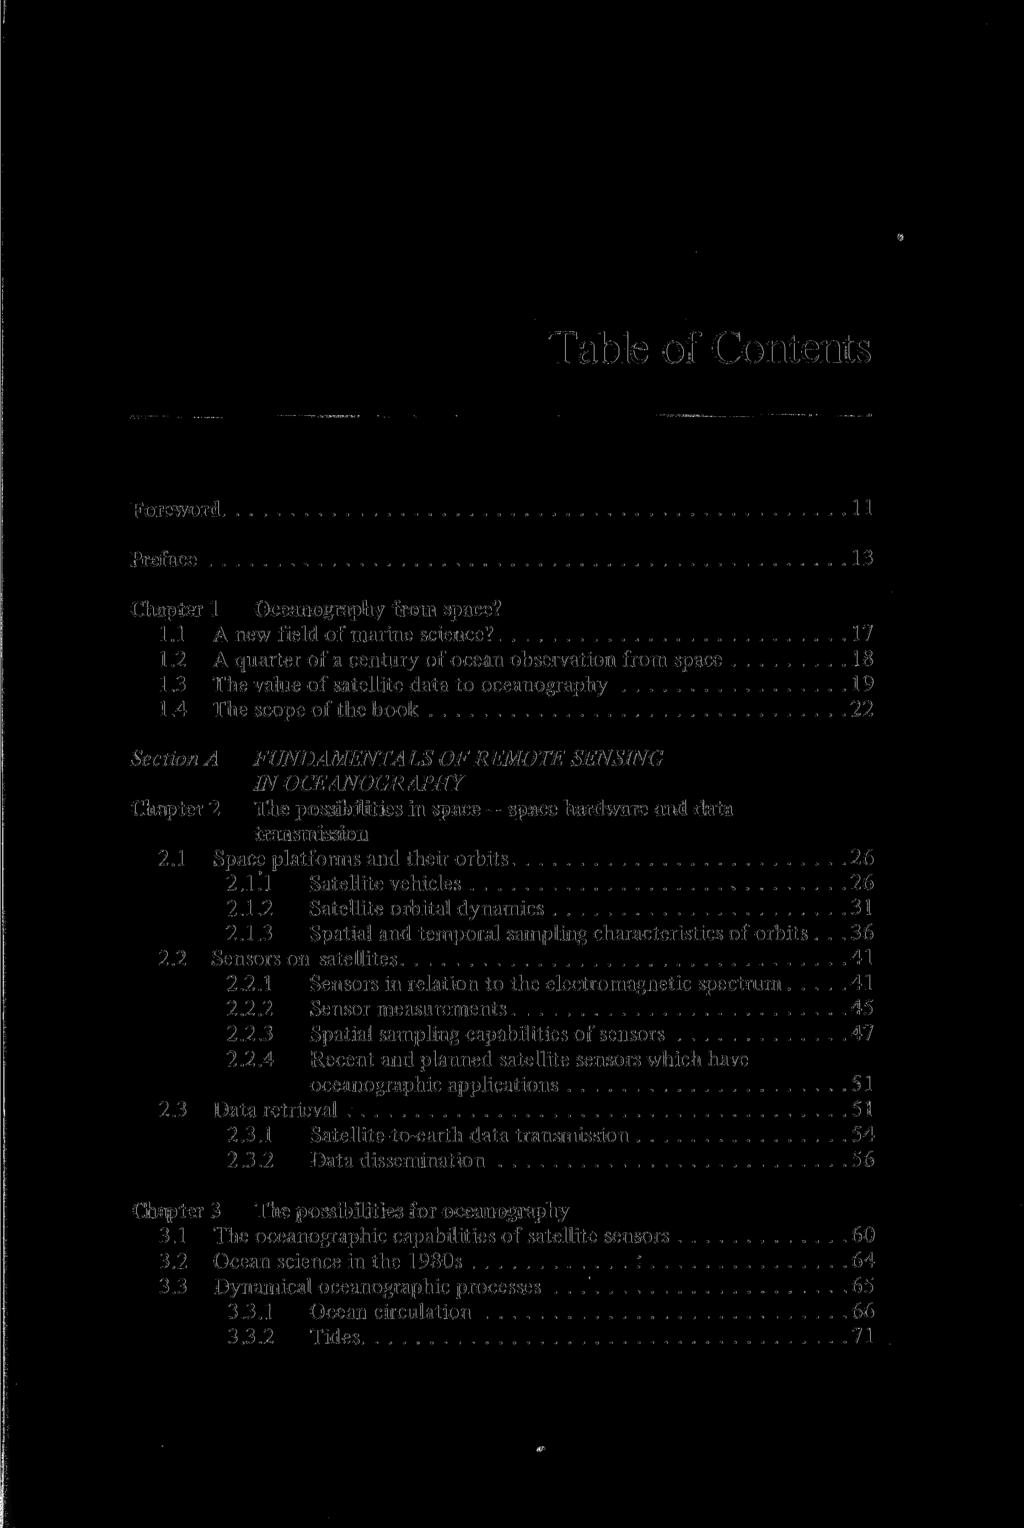 Table of Contents Foreword 11 Preface 13 Chapter 1 Oceanography from space? 1.1 A new field of marine science? 17 1.2 A quarter of a century of ocean observation from space 18 1.